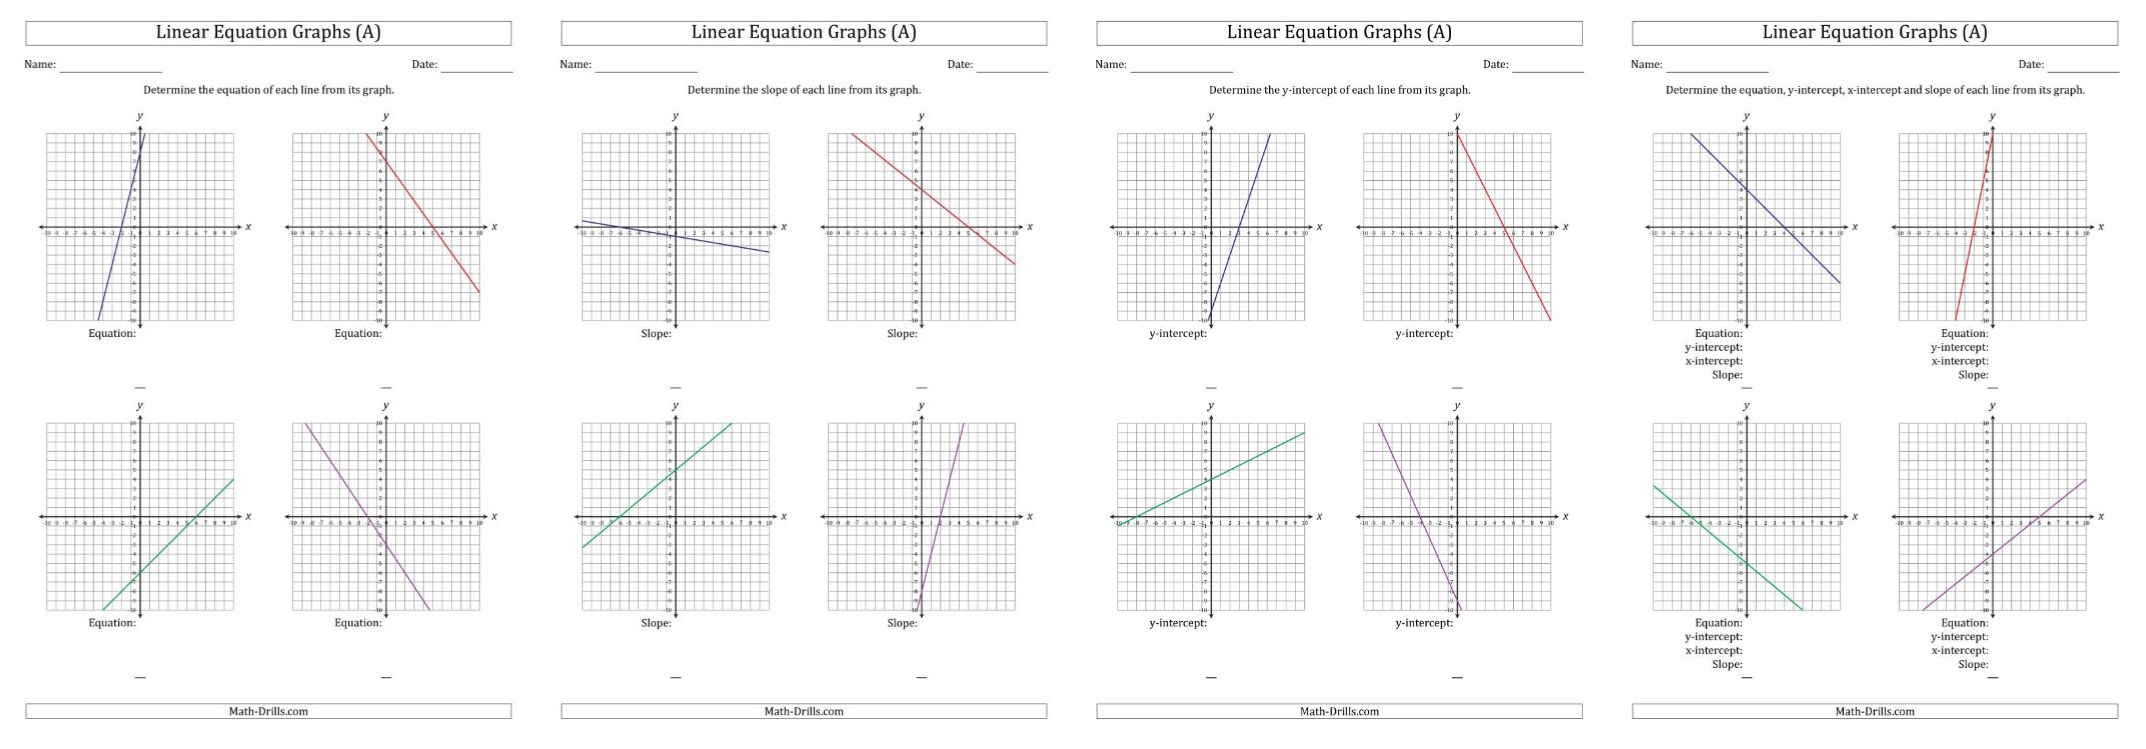 Determining Information from Linear Equation Graphs – Math-Drills Intended For Graphing Linear Equations Worksheet